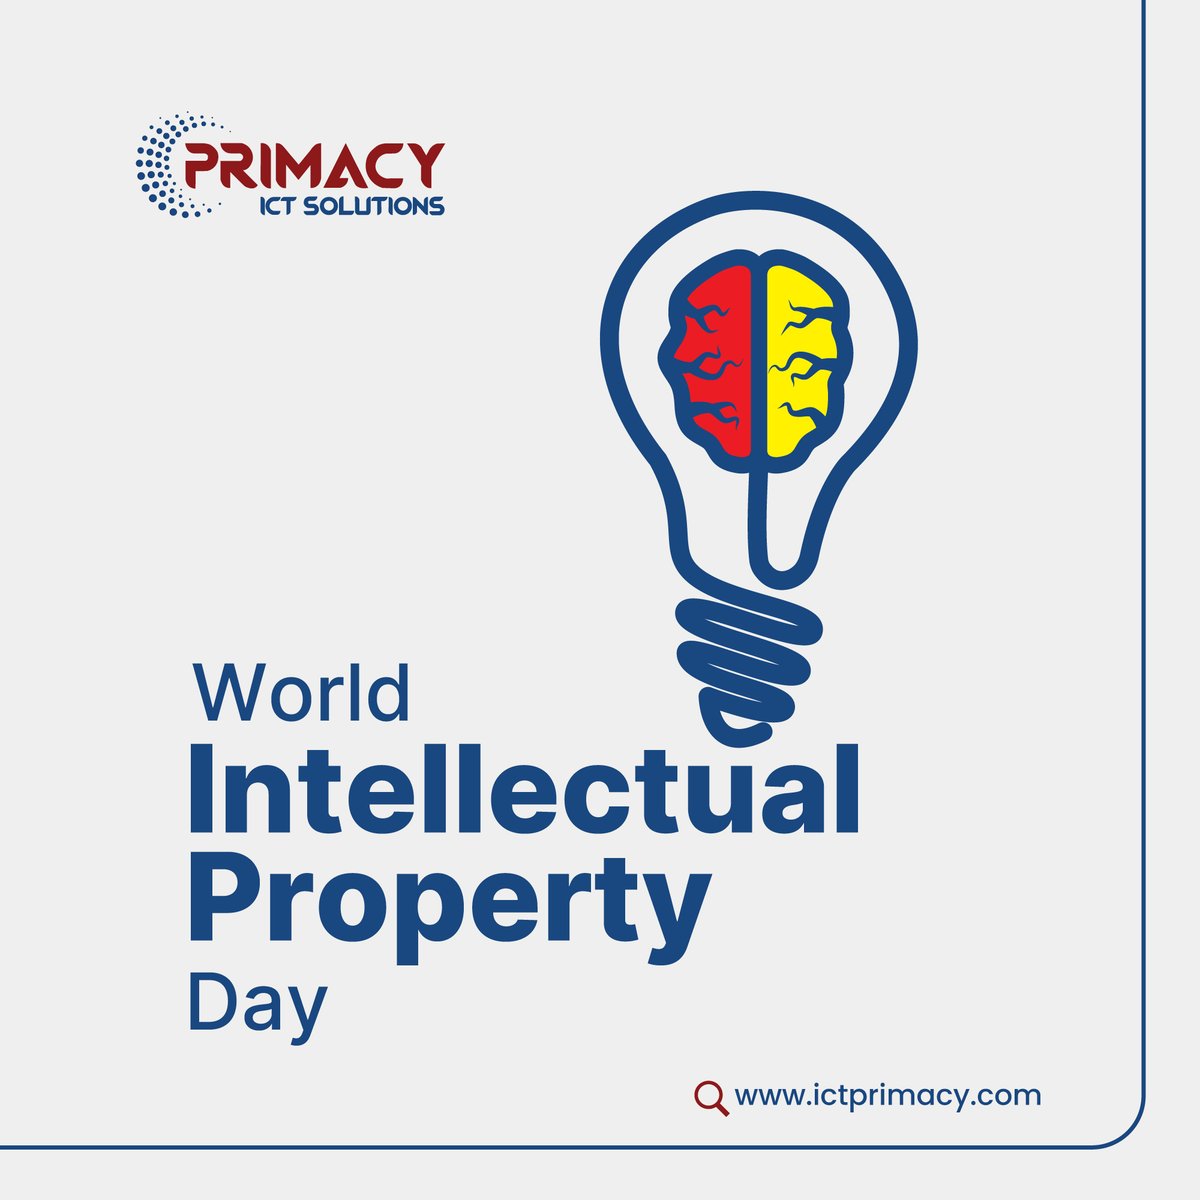 Happy World Intellectual Property Day
#worldintellectualpropertyday2024 #IPDAY #Primacy